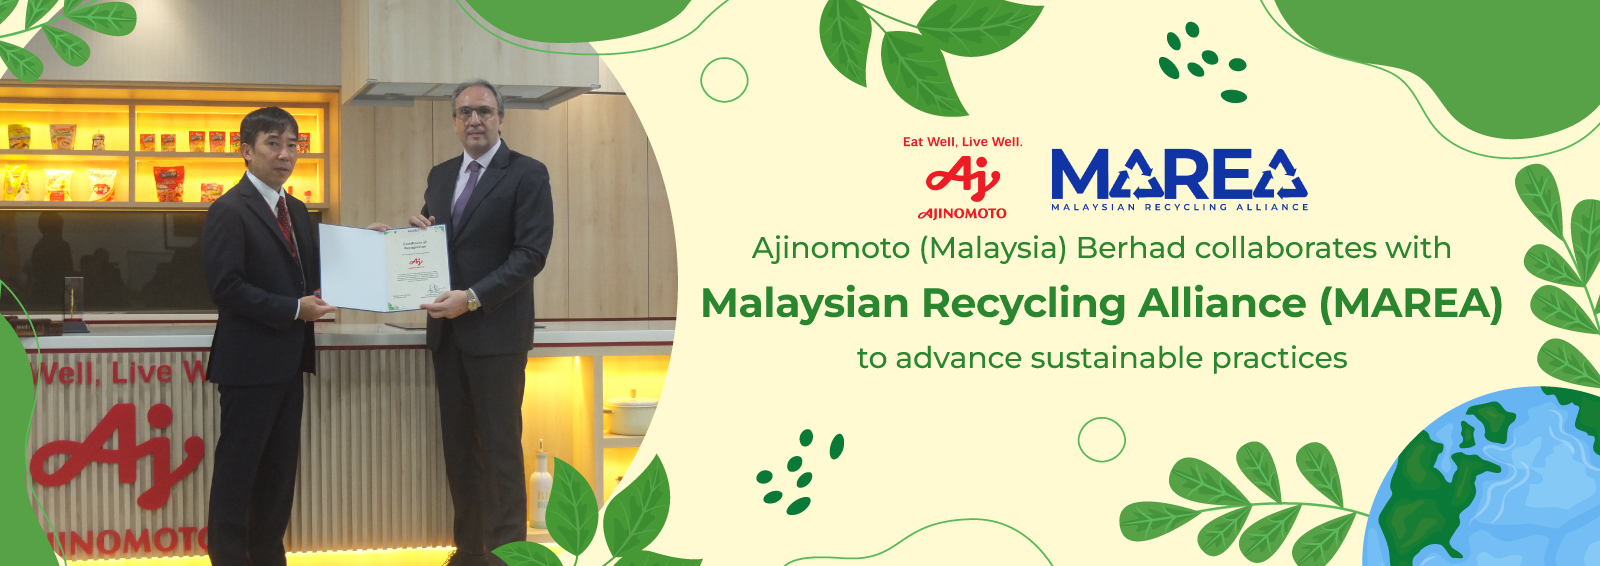 collaboration with the Malaysian Recycling Alliance (MAREA)